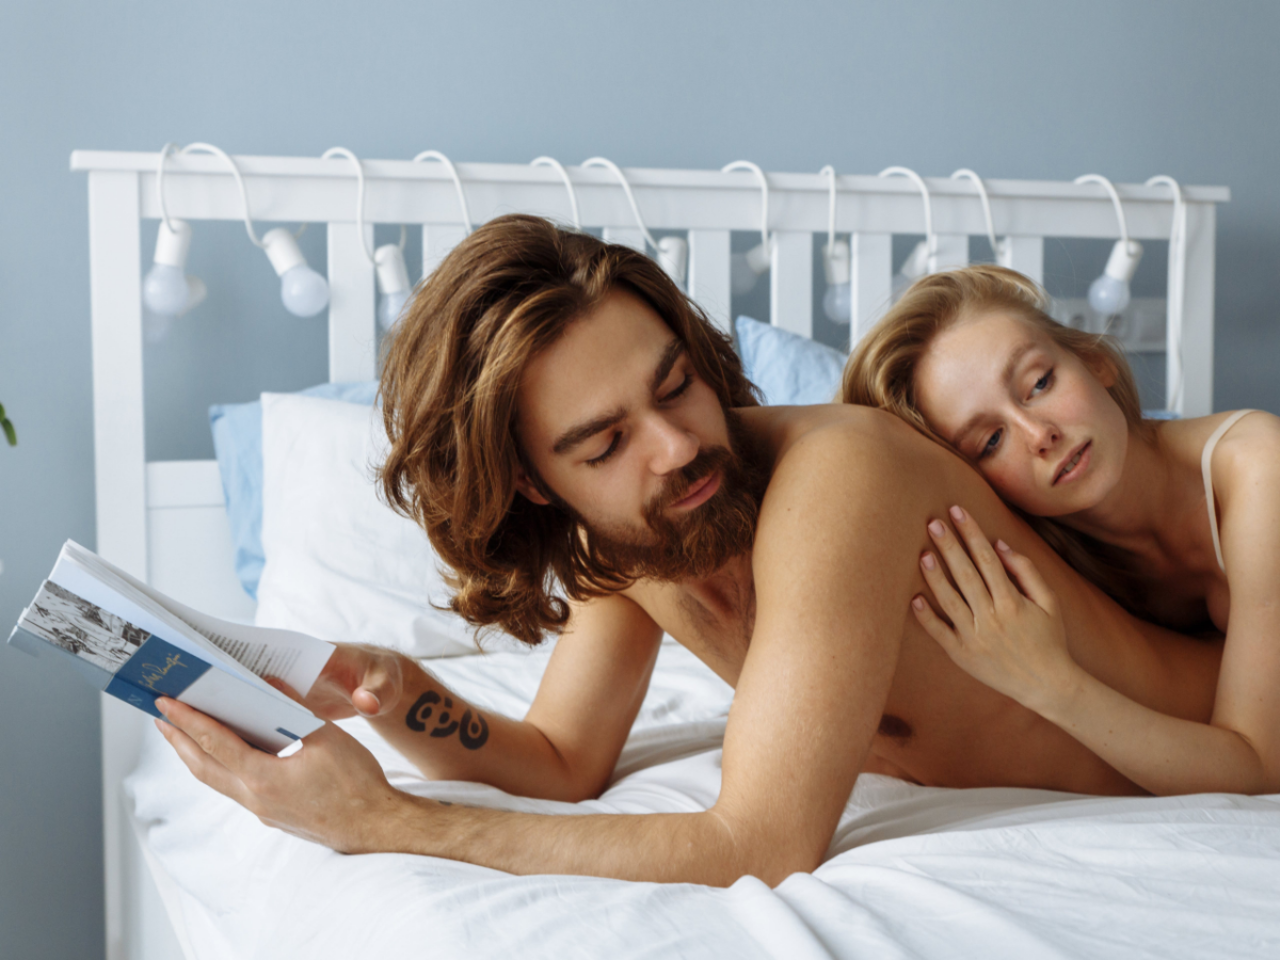 These are the pros and cons of sexual fantasies in relationships